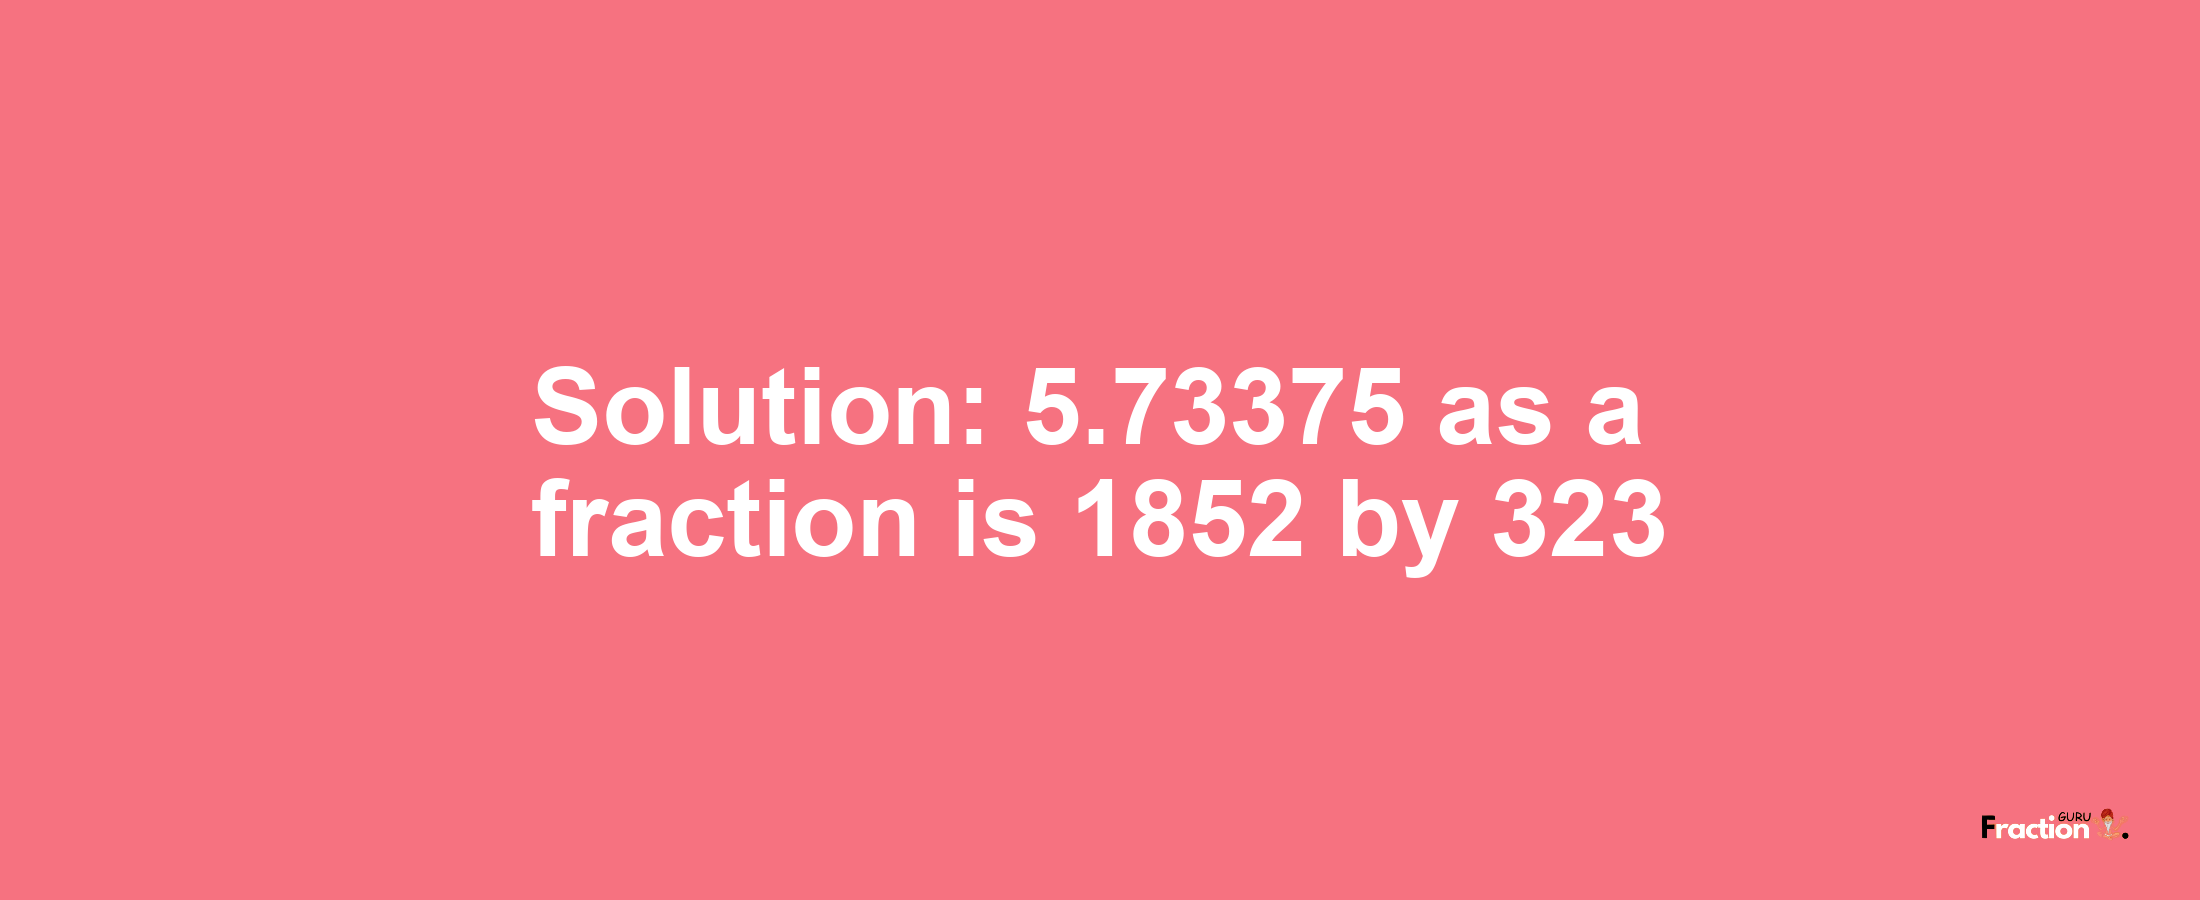 Solution:5.73375 as a fraction is 1852/323